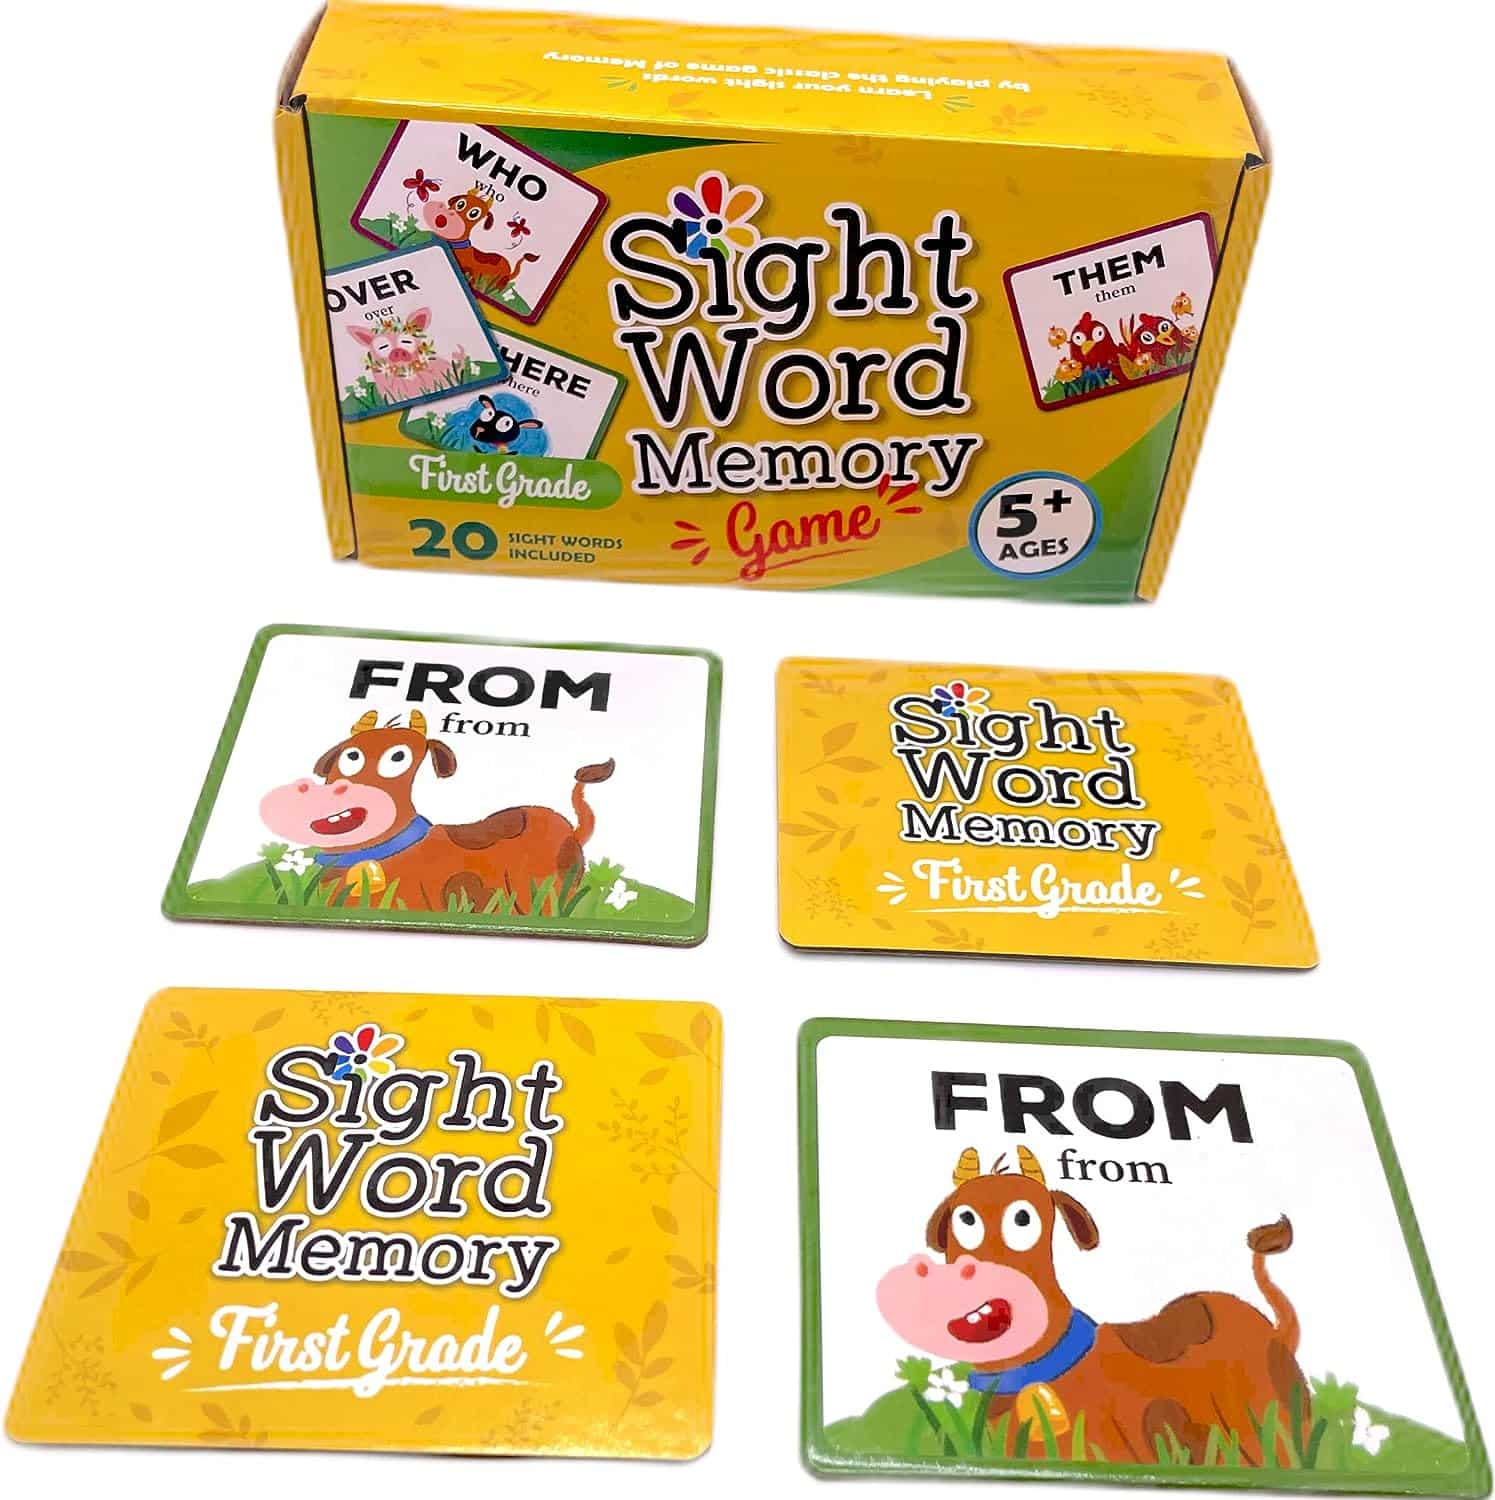 Urban Supply Co Sight Word Memory Game Review: A Fun and Educational Way to Enhance Language Skills